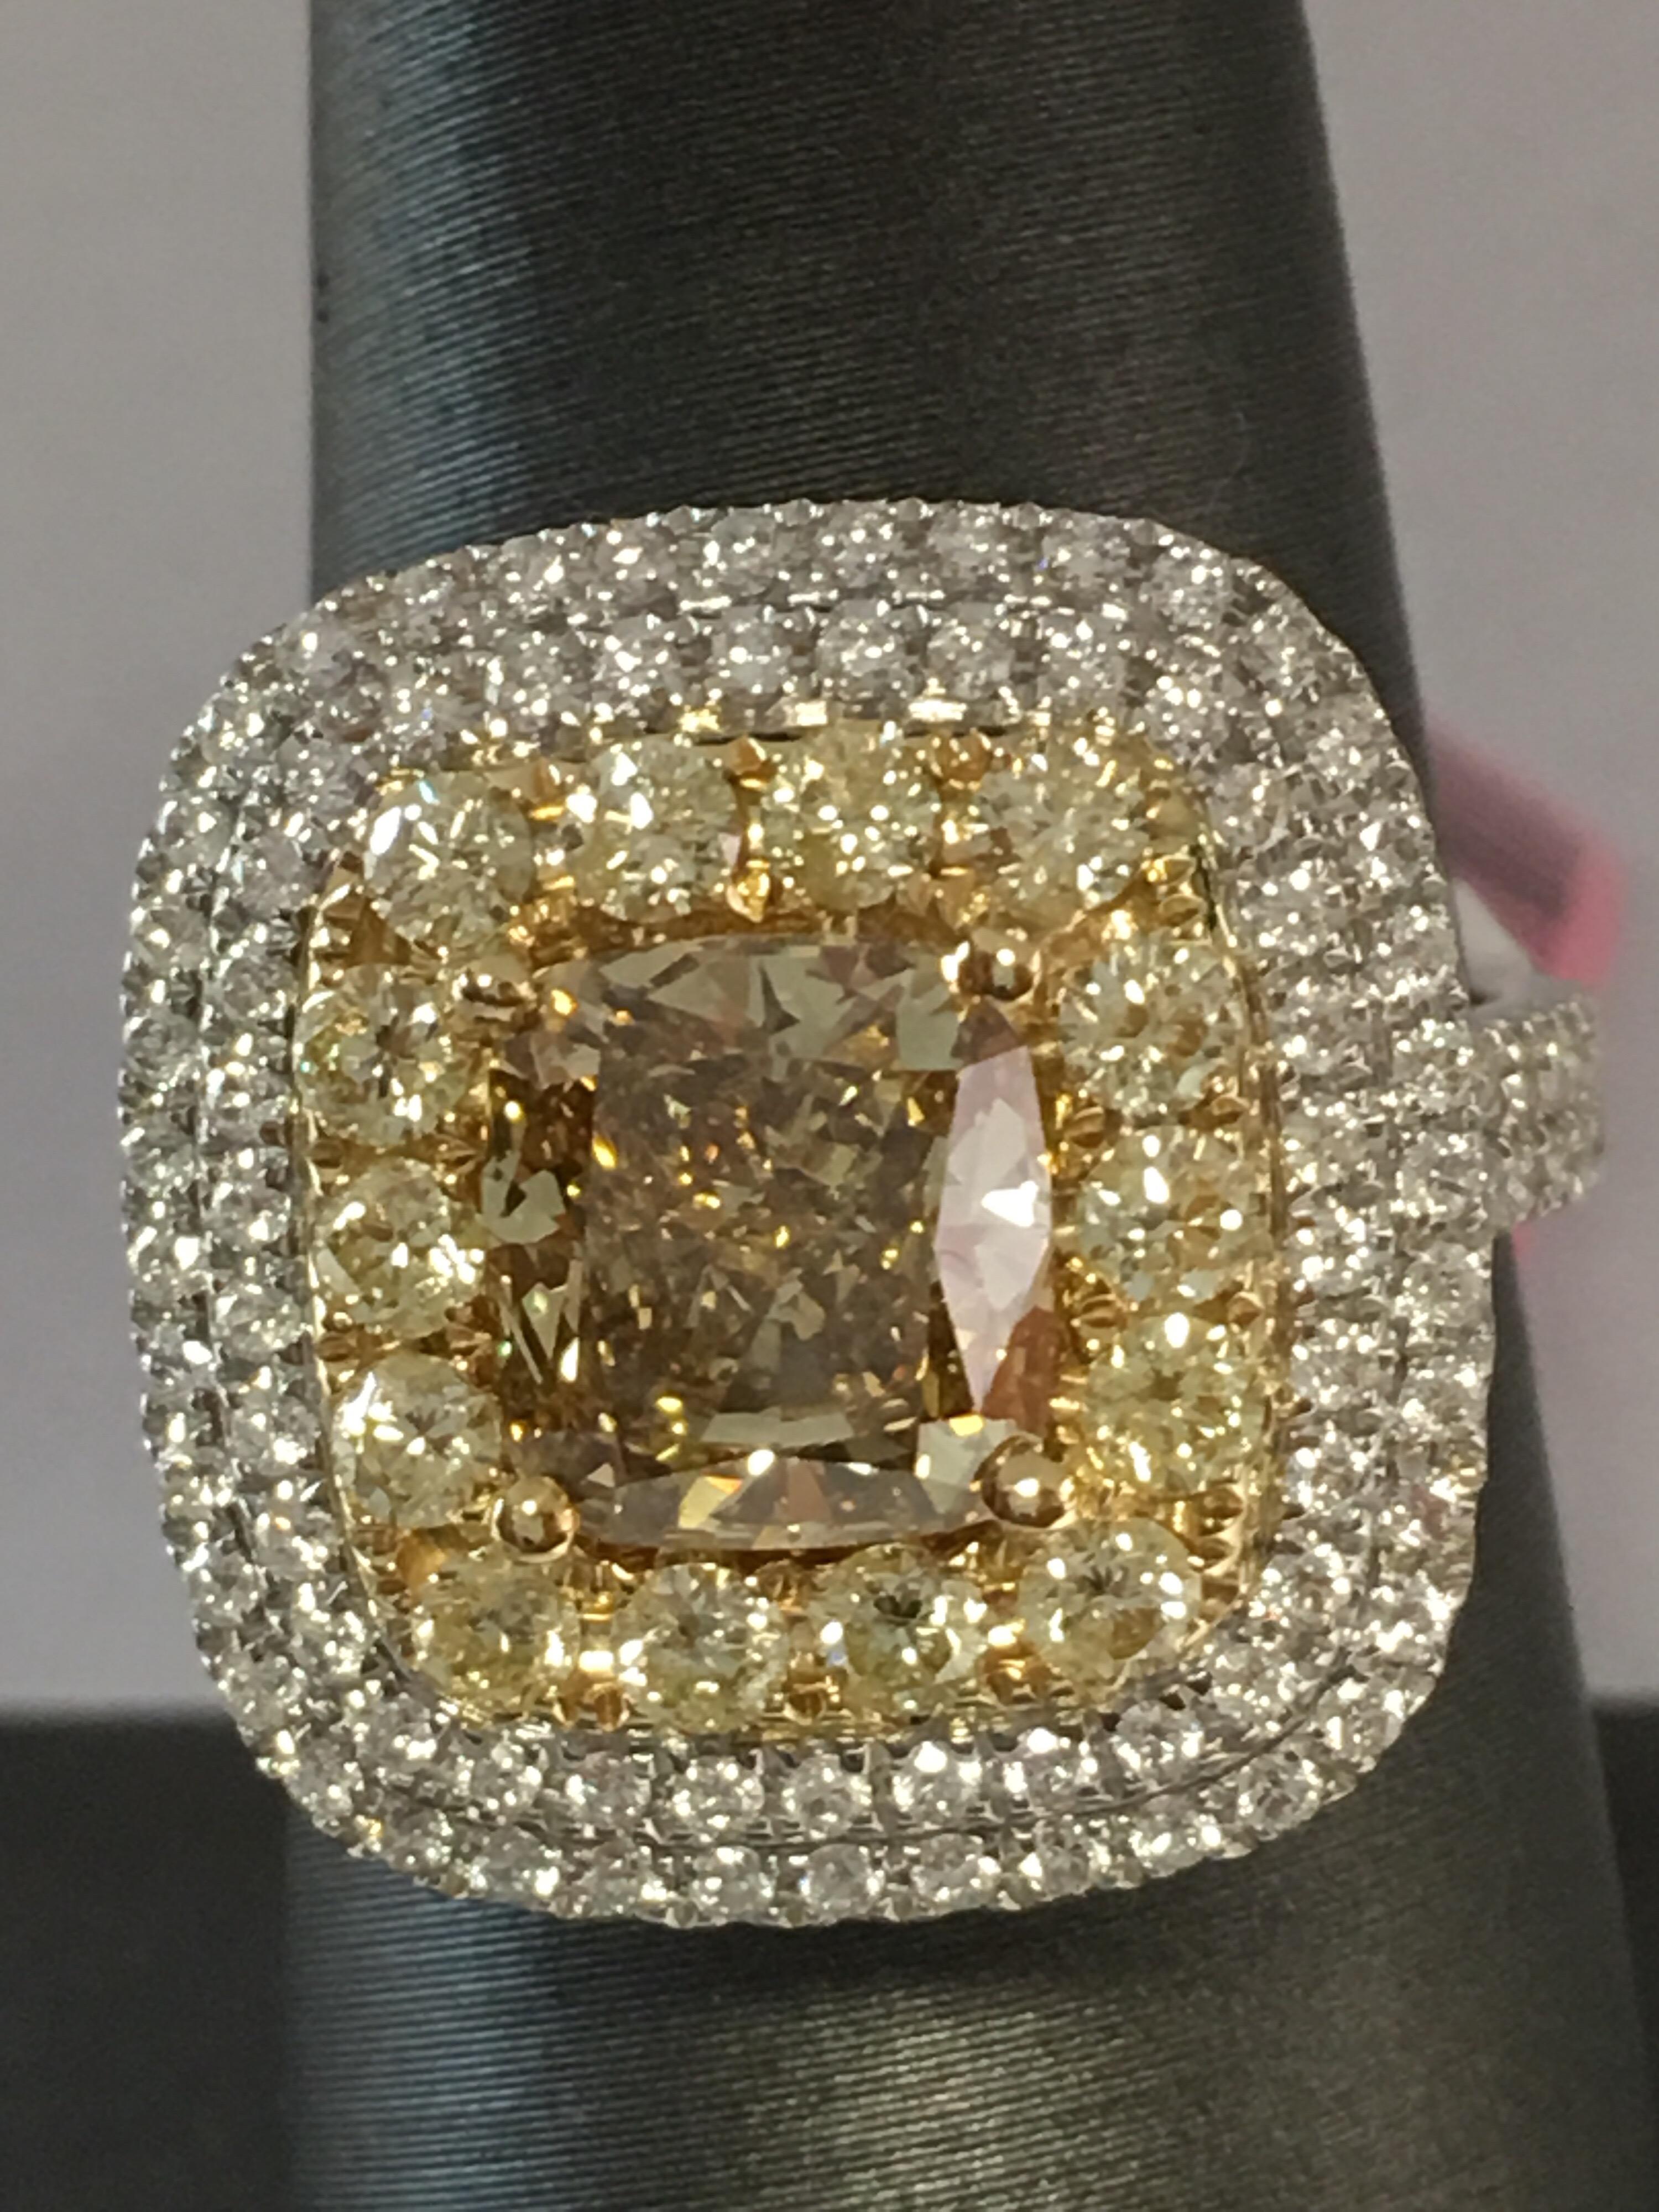 Center 2.21 CTS Cushion cut Yellow diamond and other halo yellow 14 pcs weigh 0.68 CTS and other white round diamonds weigh 2.66 CTS and total diamonds 5.55CTS set in 18K two tone gold. Now size is 7 but you can resize the ring in your local jewelry